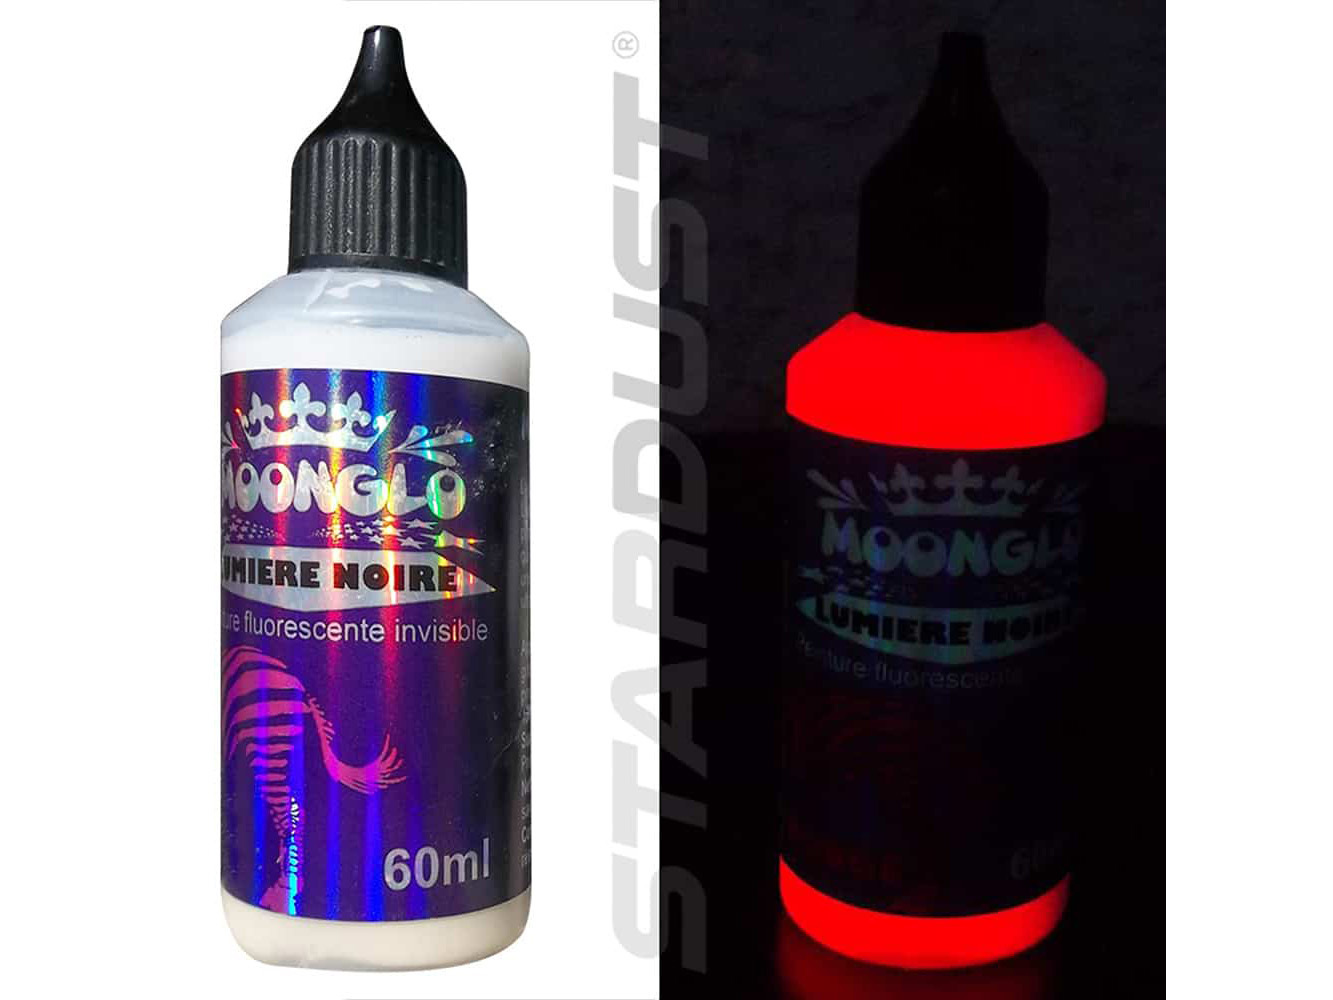 Stardust MOONGLO BLACKLIGHT INVISIBLE UV Farbe für Pinsel - RED 60ml